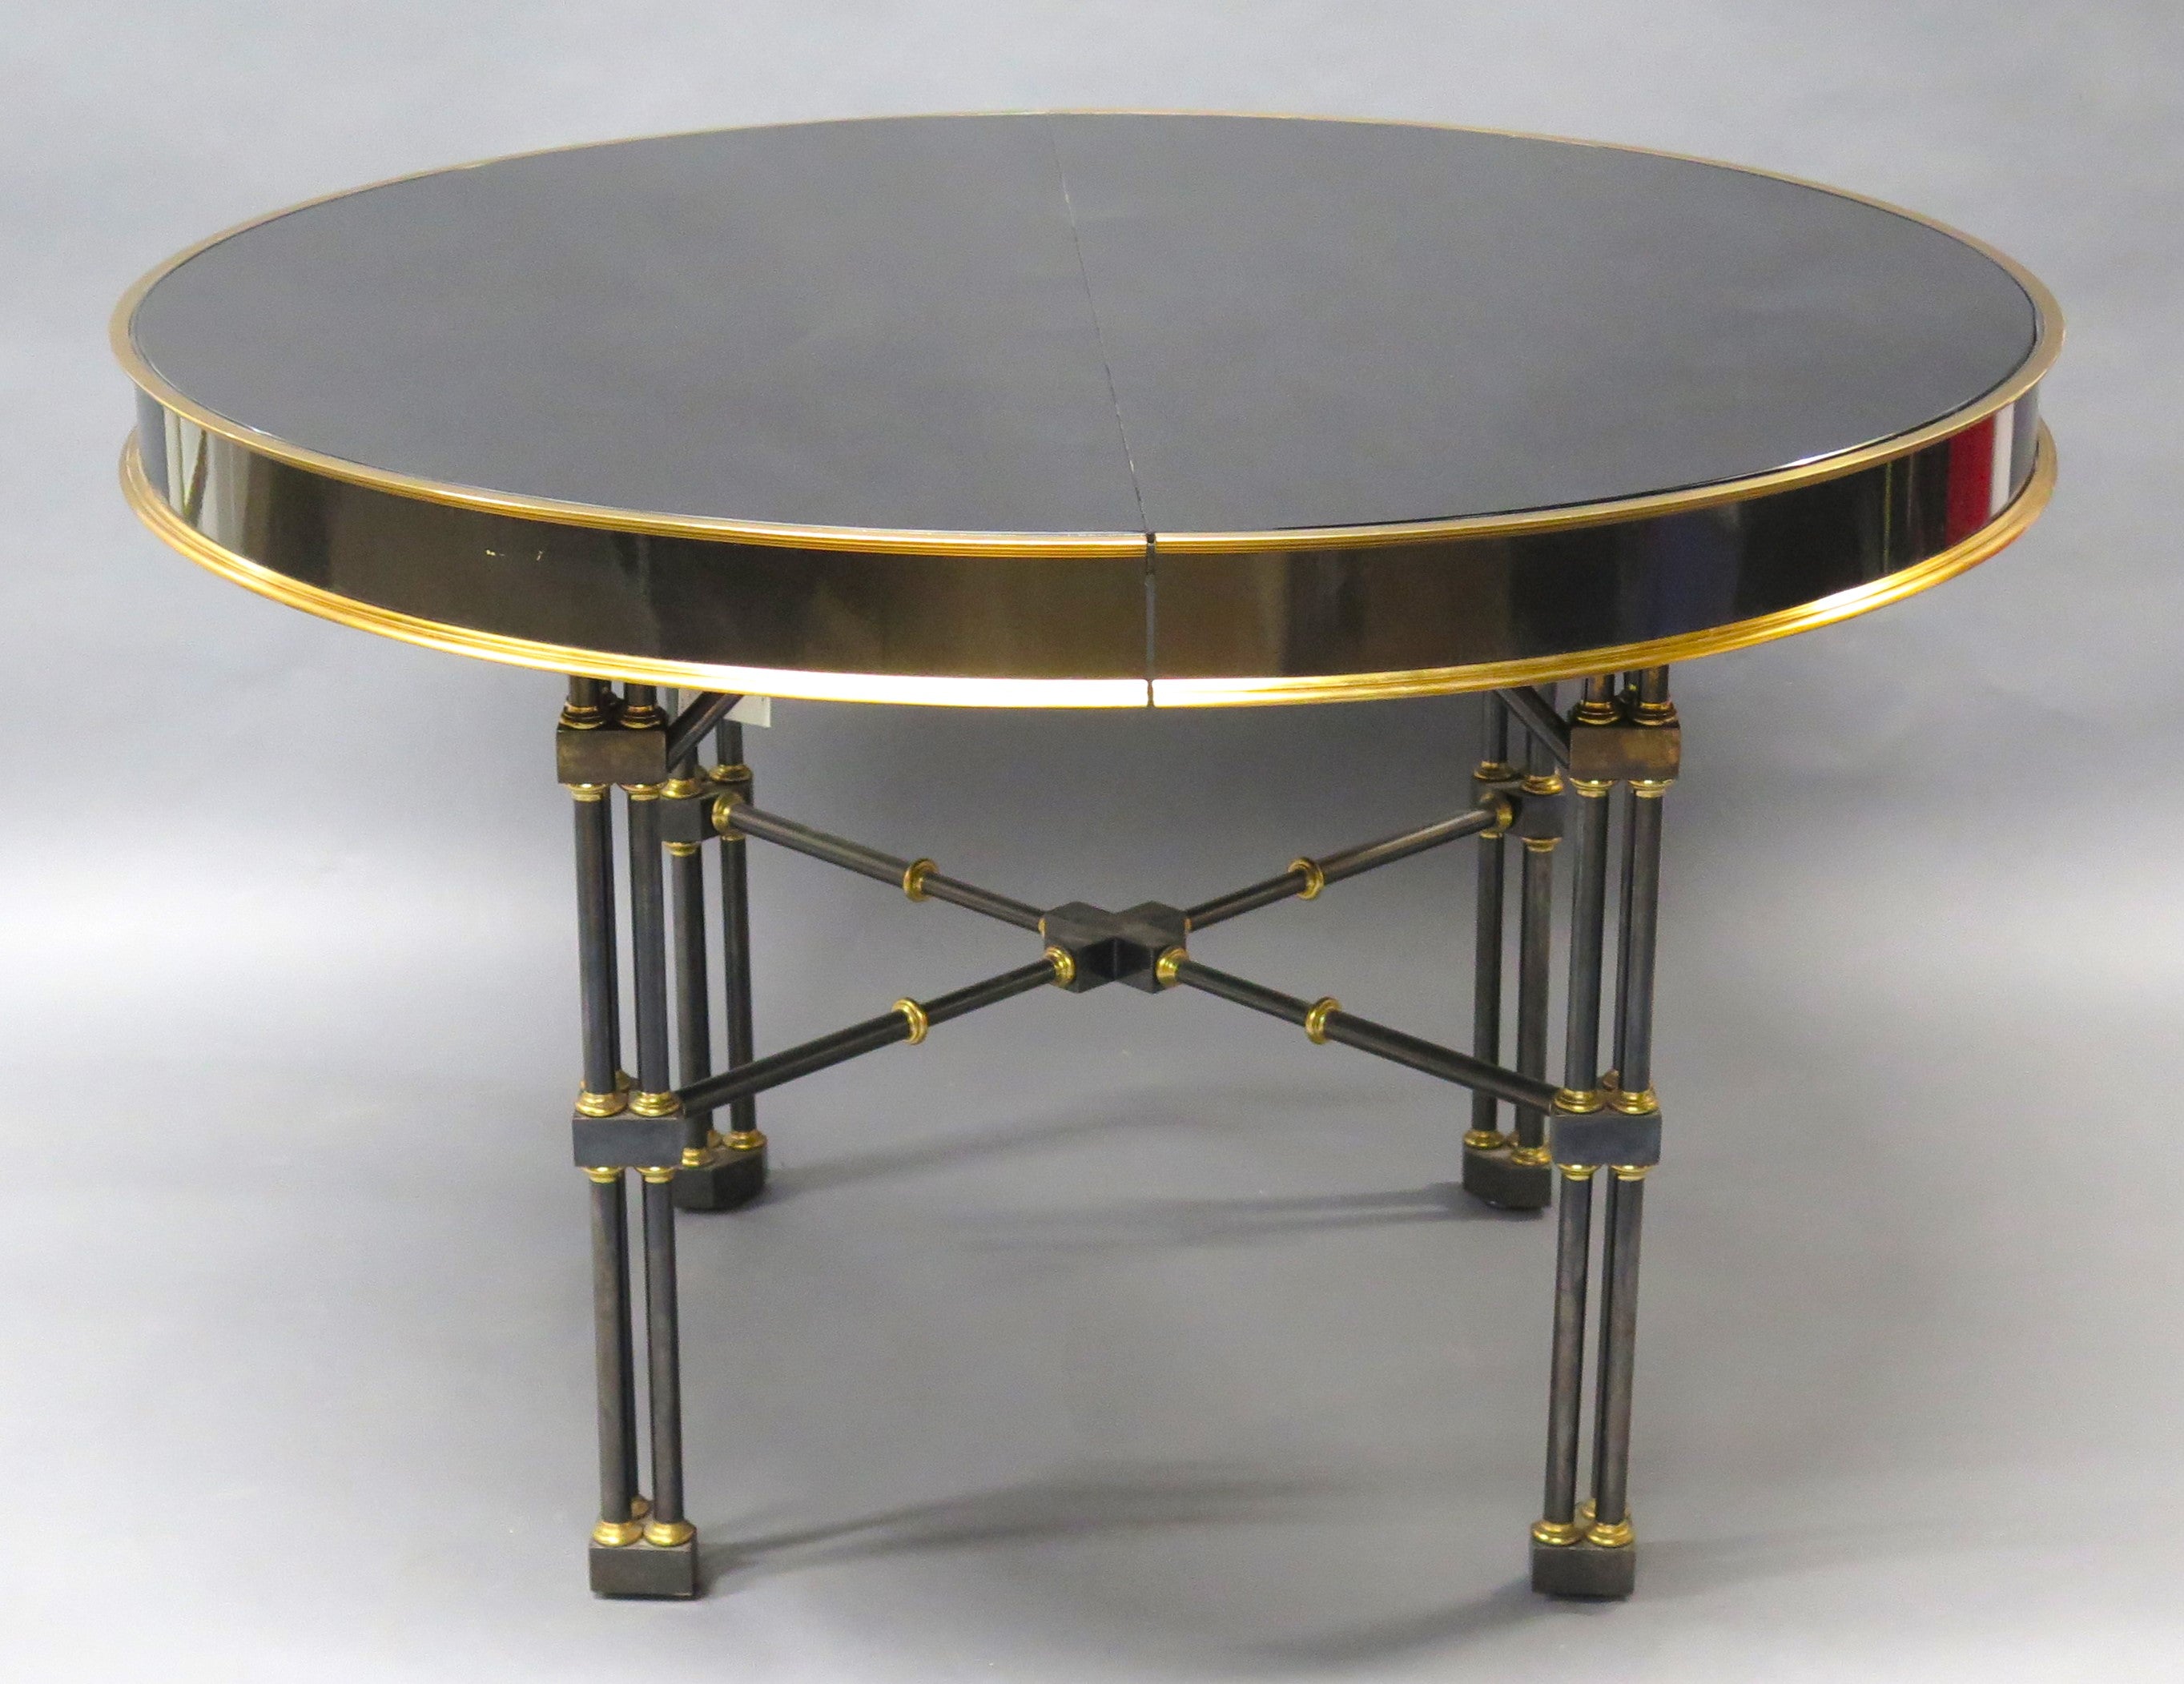 Modern Chinese Chippendale-Style Dining / Center Table by Ron Seff, Ltd.